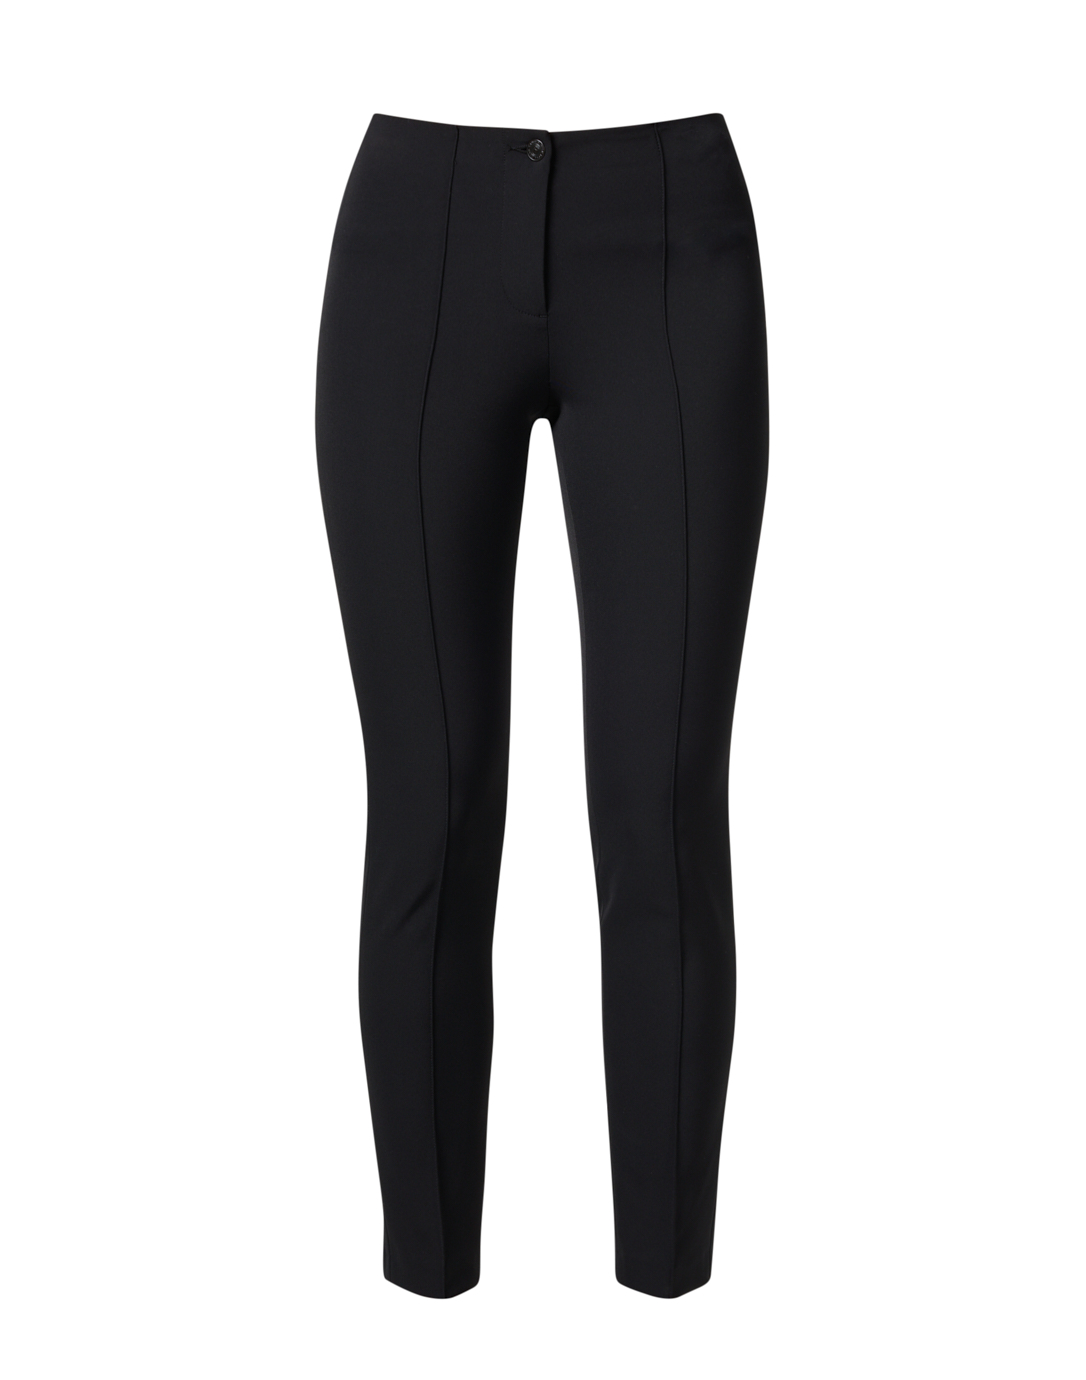 Body Care Insider Womens Black Thermal Pants 105 cm –